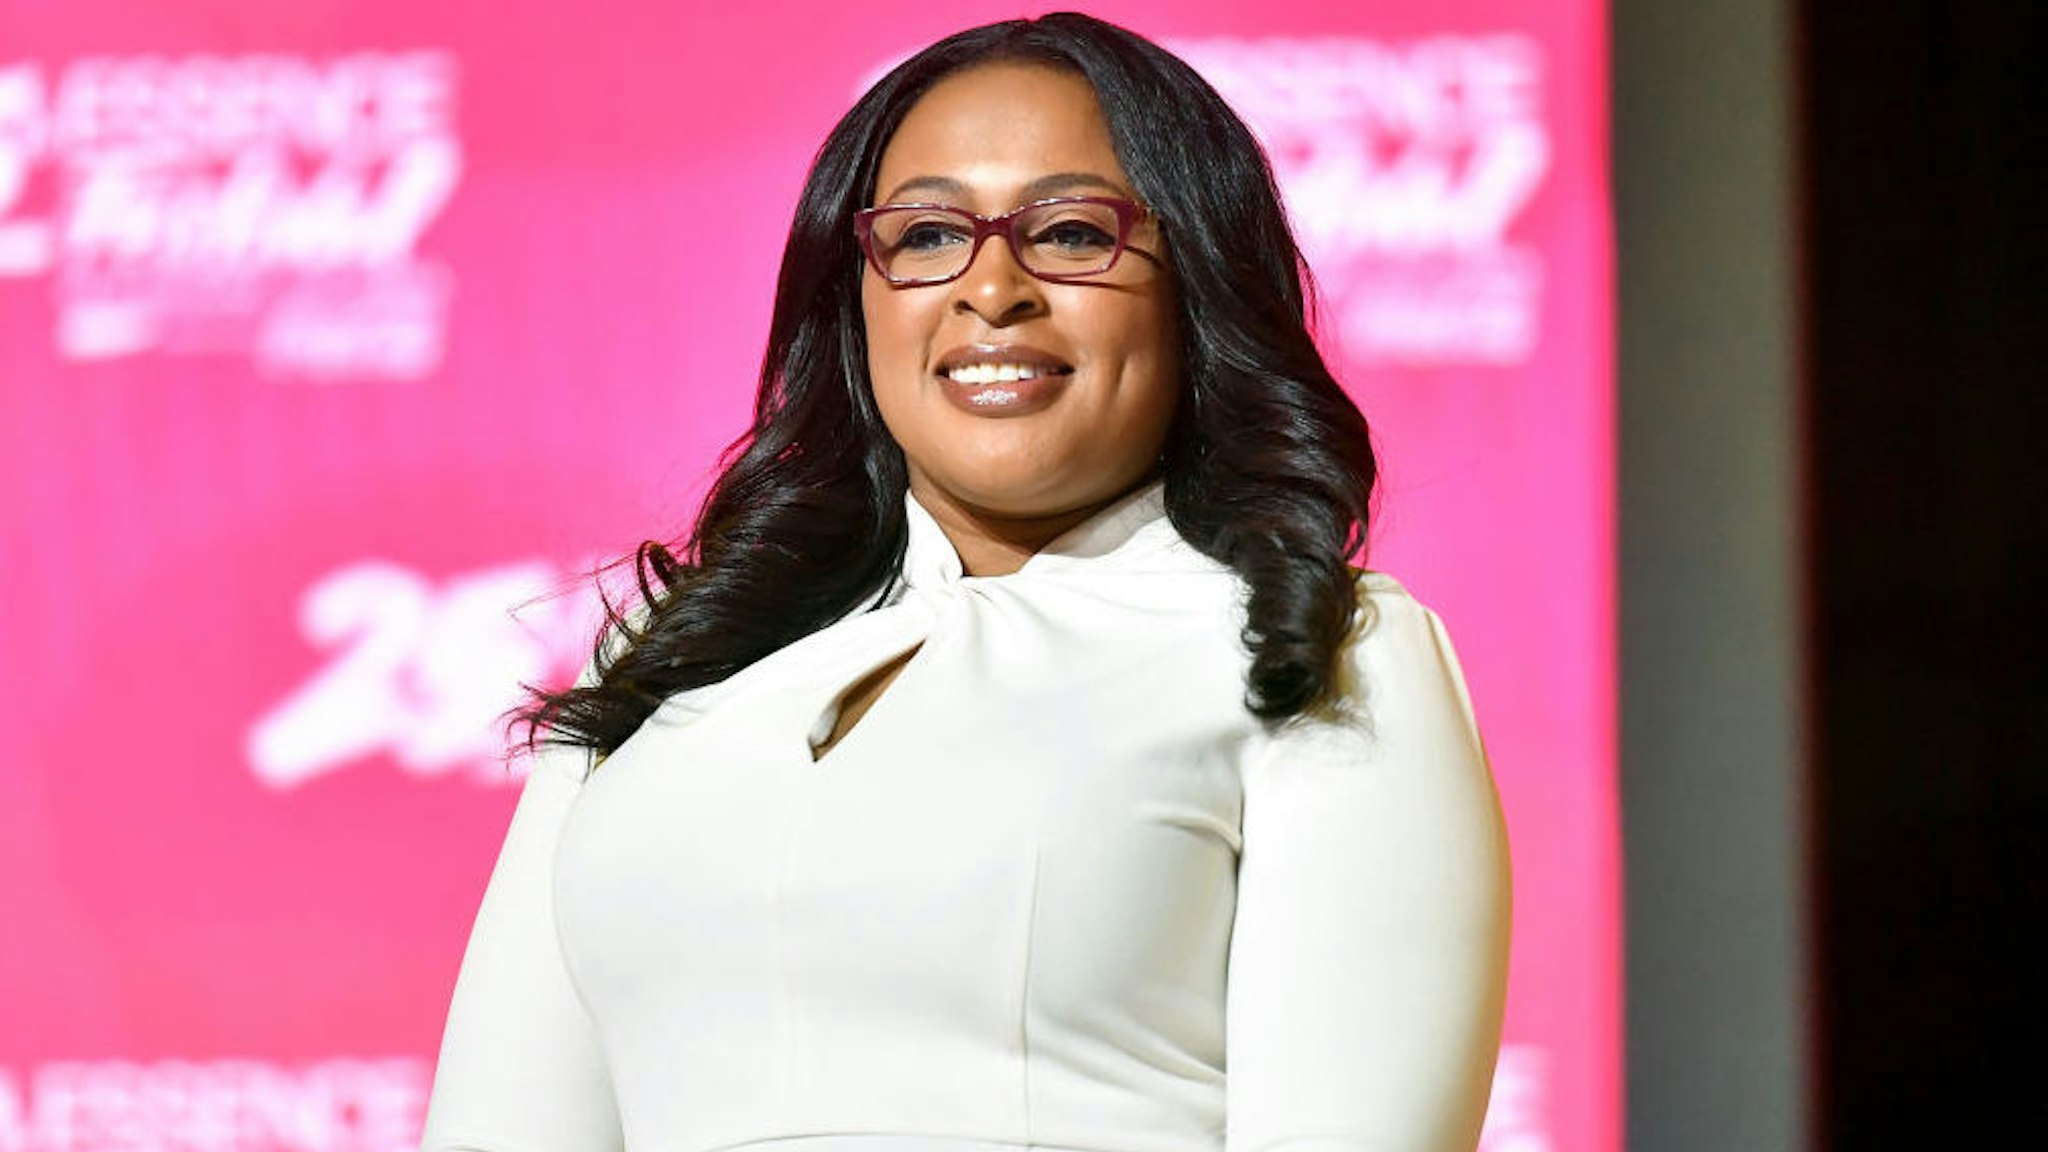 Mayor Lovely Warren speaks on stage at 2019 ESSENCE Festival Presented By Coca-Cola at Ernest N. Morial Convention Center on July 06, 2019 in New Orleans, Louisiana.